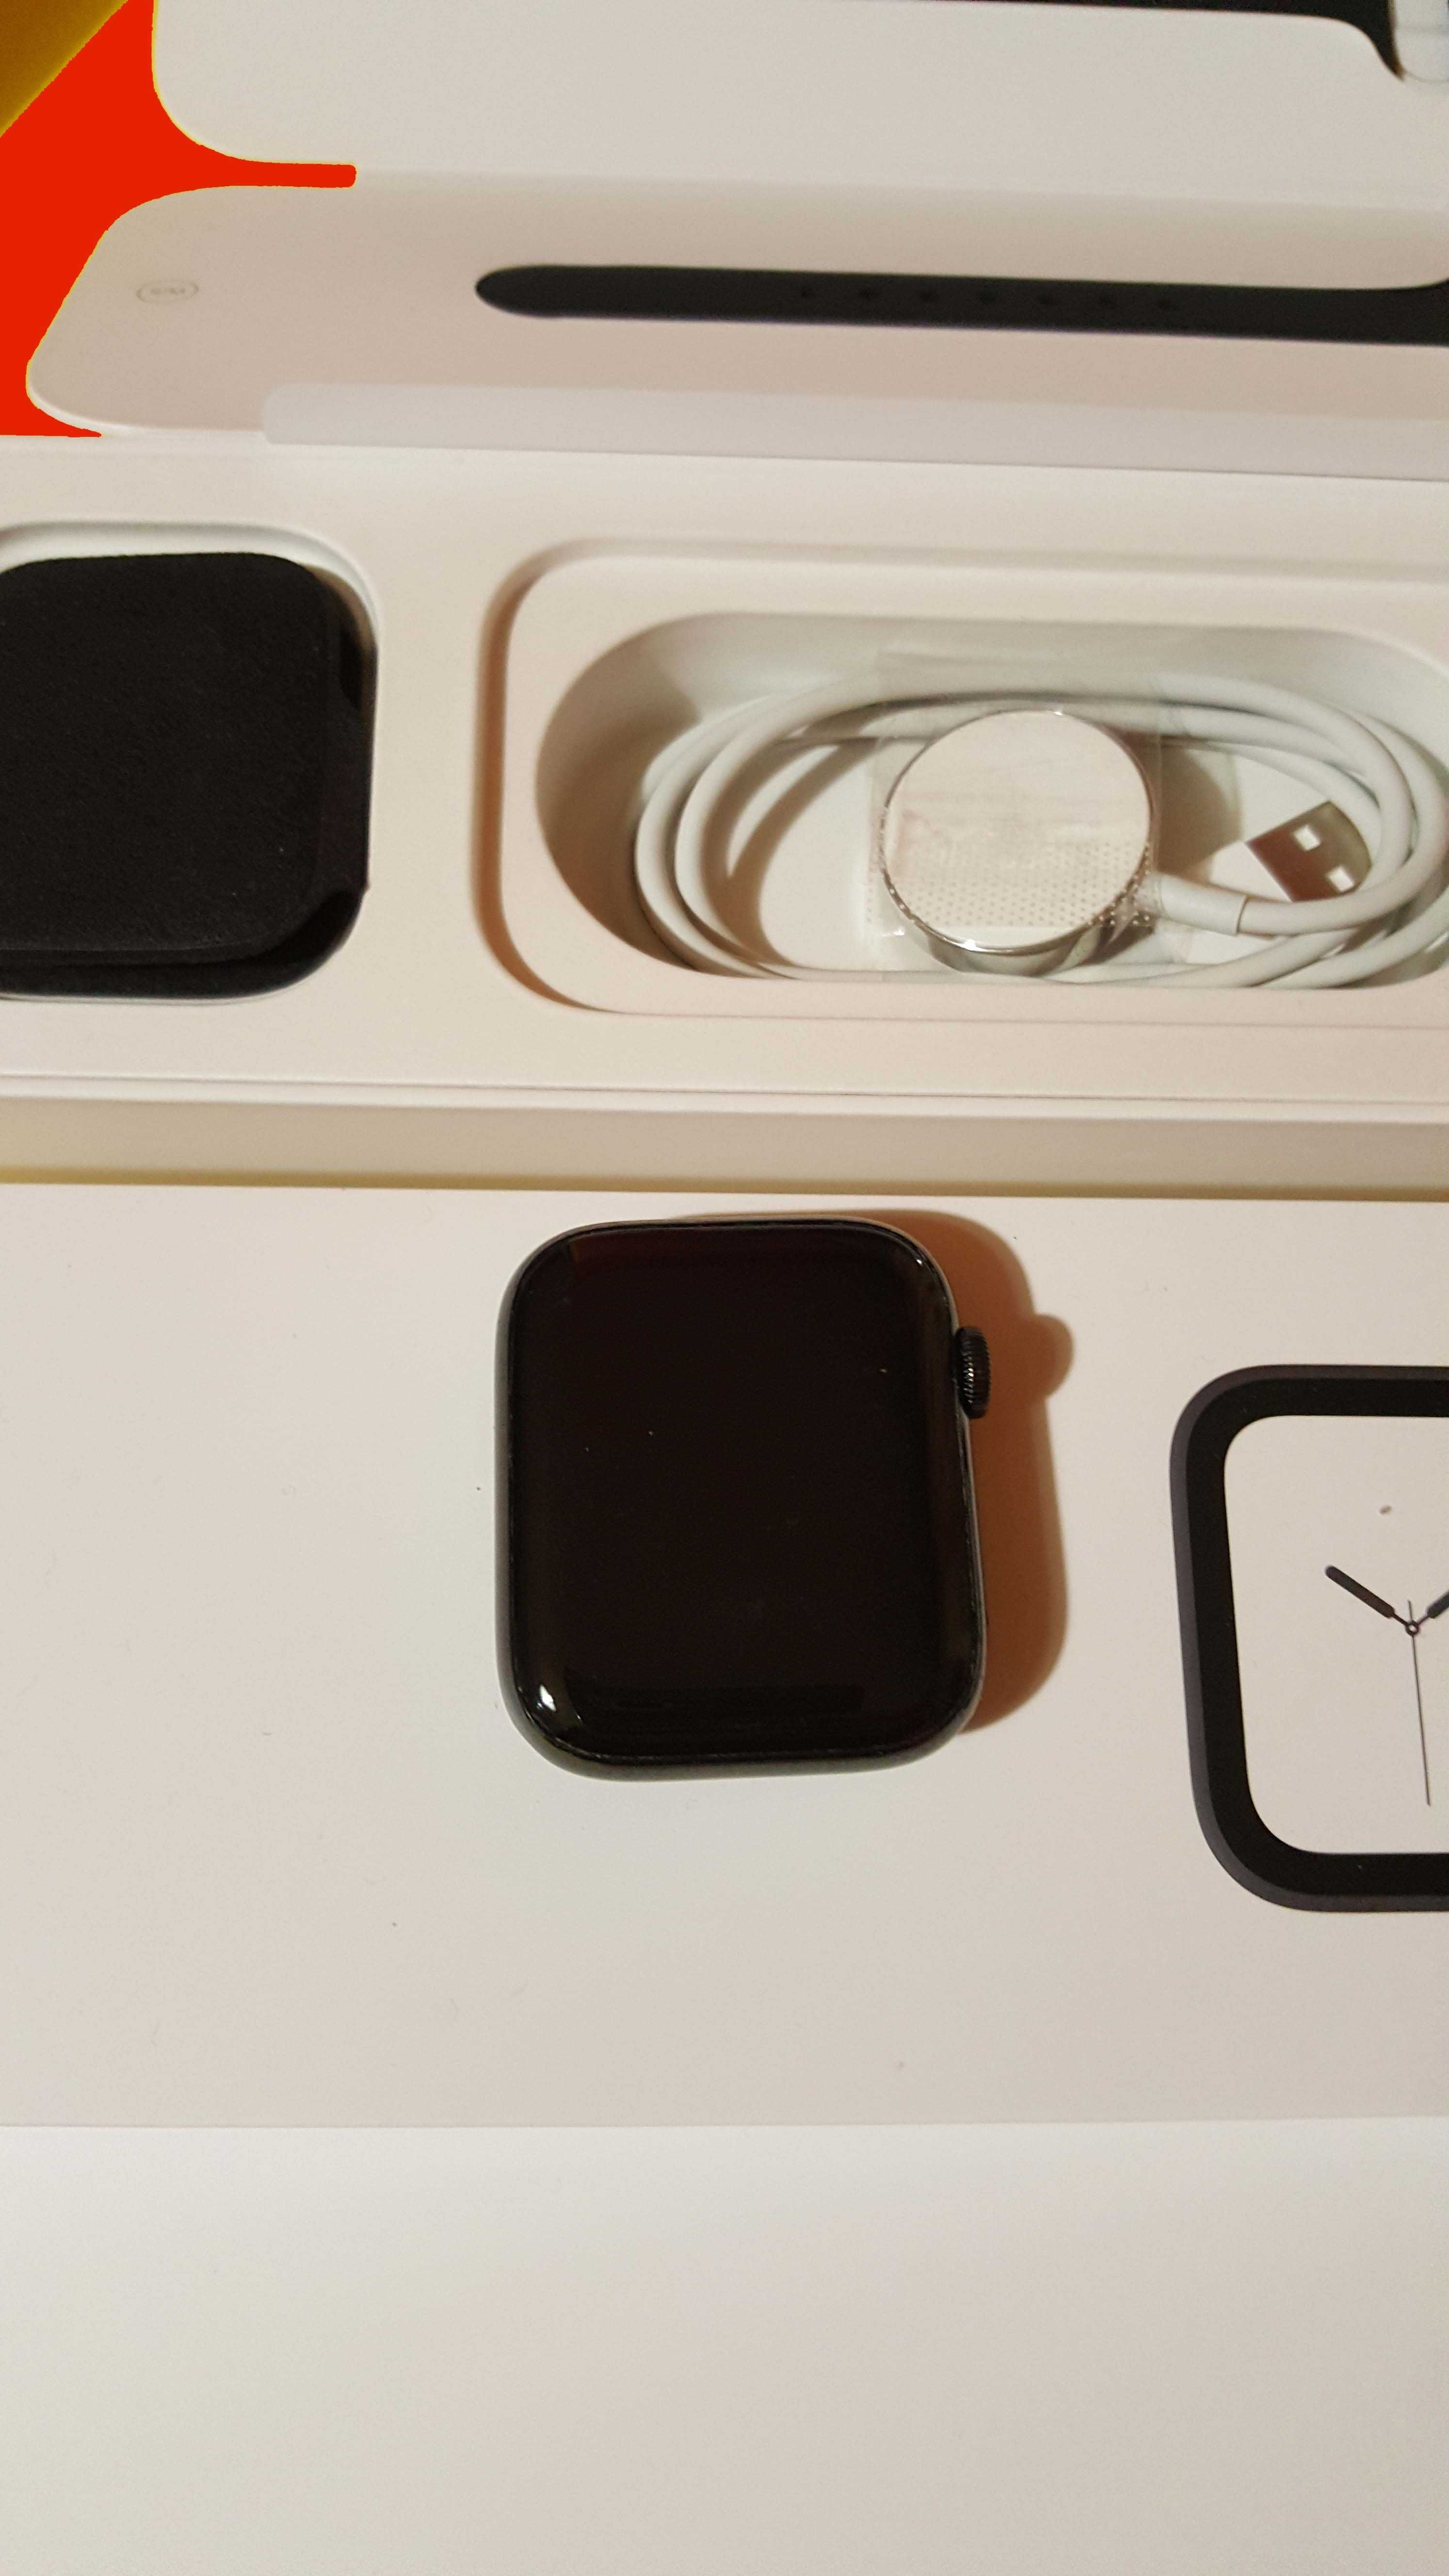 Apple Watch S4 GPS + Cellular, 44mm Stainless Steel